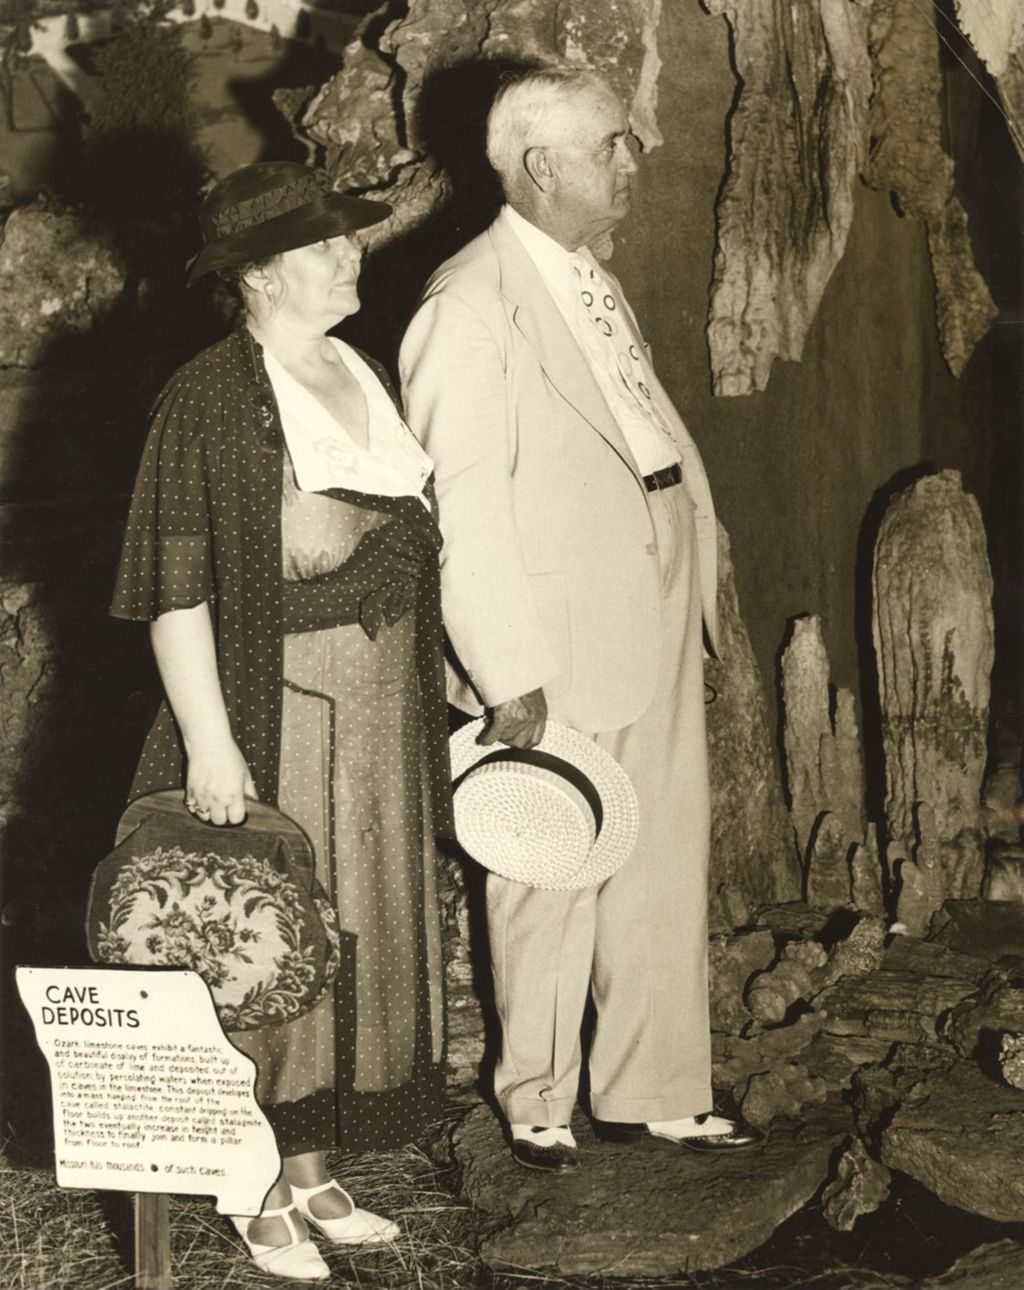 Miniature of Governor and Mrs. Guy B. Parks of Missouri view exhibit of cave deposits in the Court of States